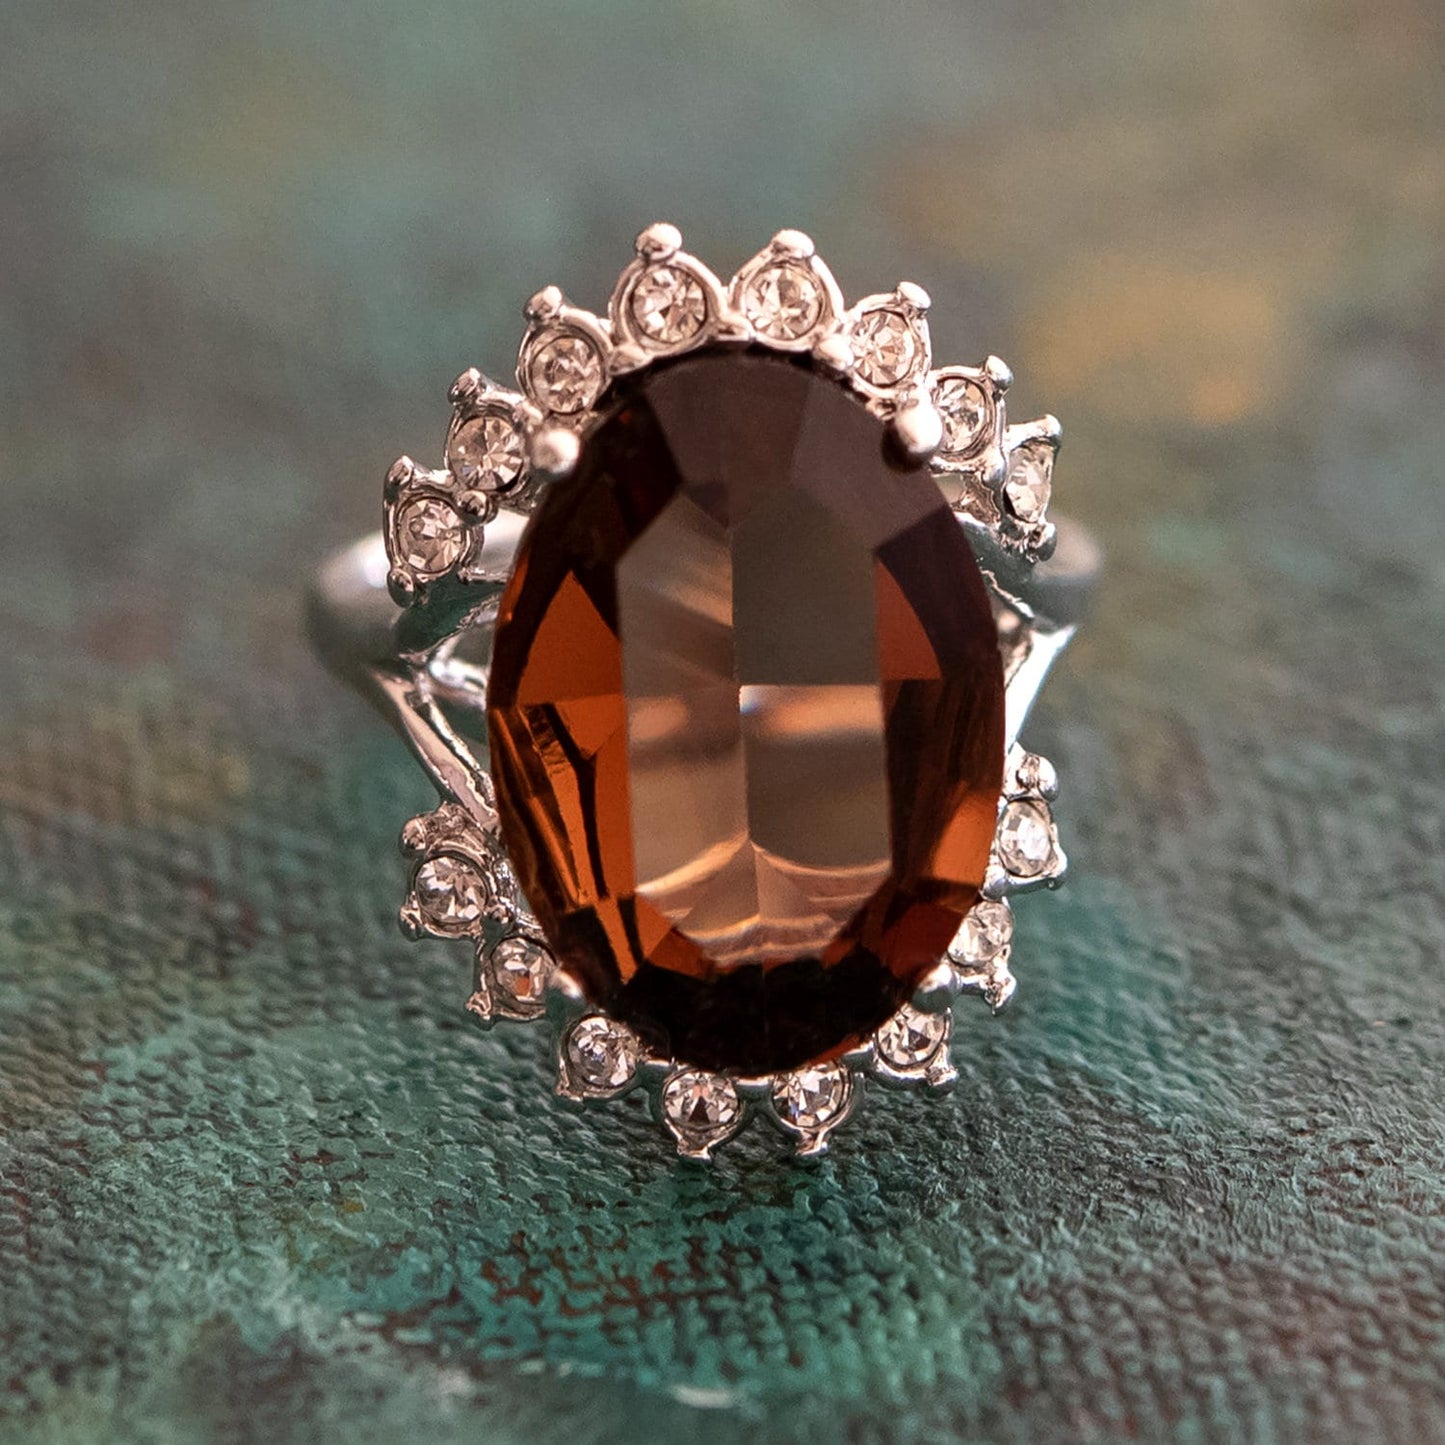 Vintage 1970's Ring Topaz and Clear Swarovski Crystals 18k White Gold Plated Band R1909